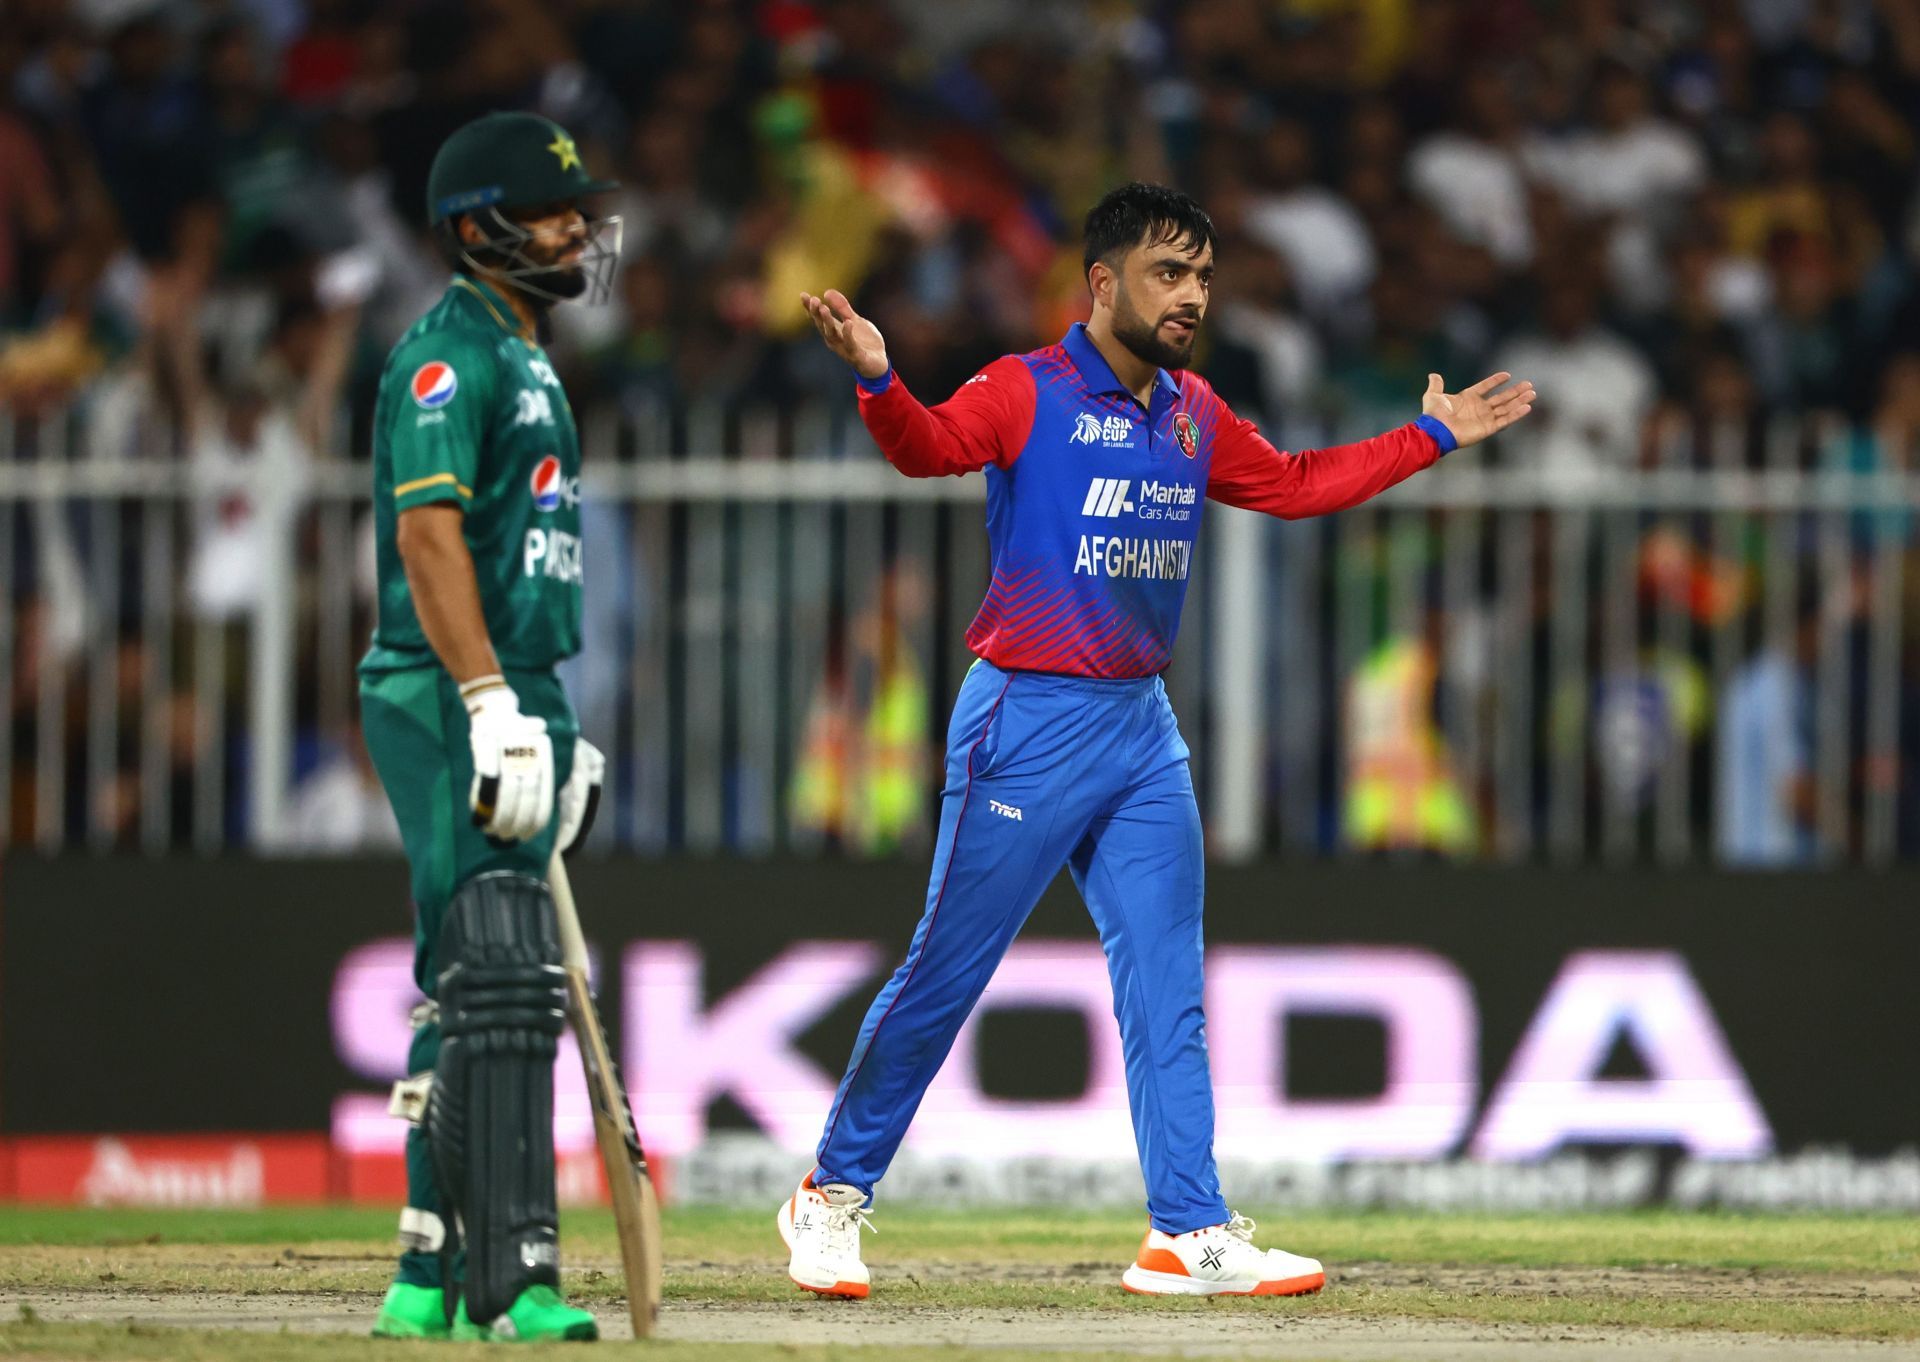 Afghanistan v Pakistan - DP World Asia Cup (Image: Getty)